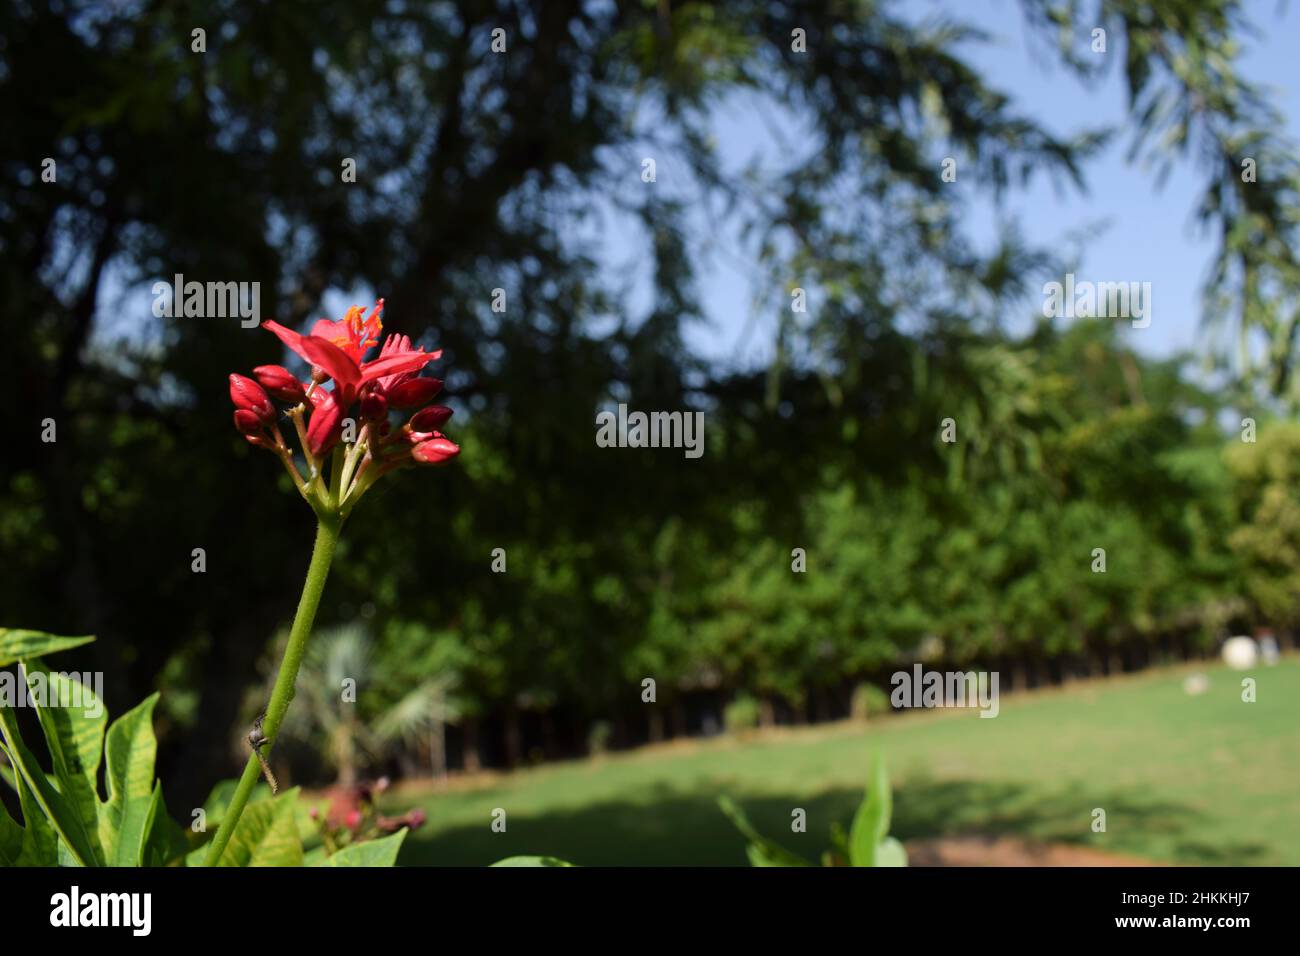 Jatropha integerrima or Peregrina bunch small red flowers with three lobed leaves planted in greenery trees background environment with blue sky Stock Photo